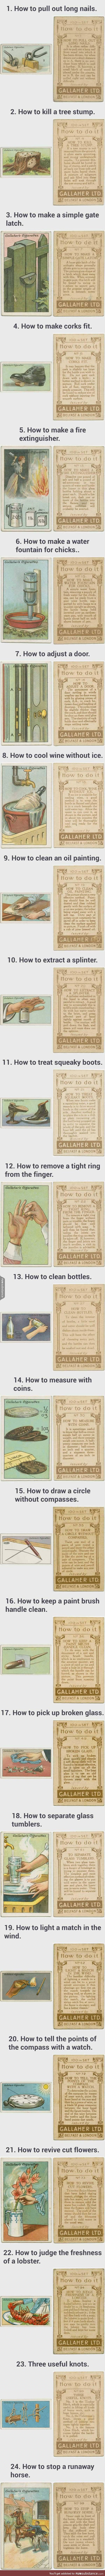 24 Life Hacks from 100 Years Ago